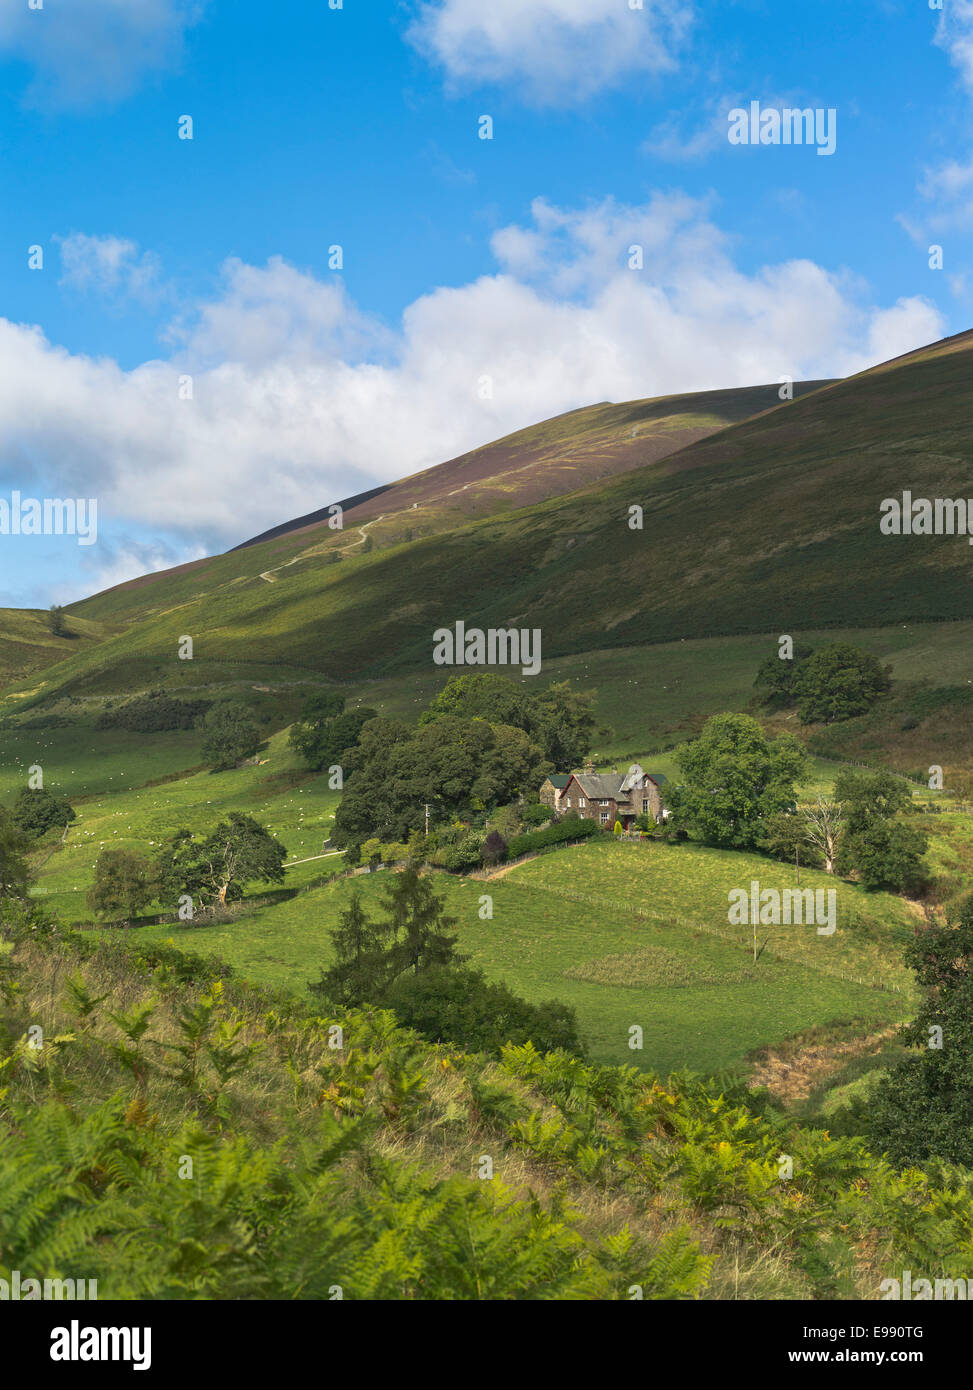 Dh Lonscale cadde KESWICK Lake District Country house in campagna pennini Foto Stock